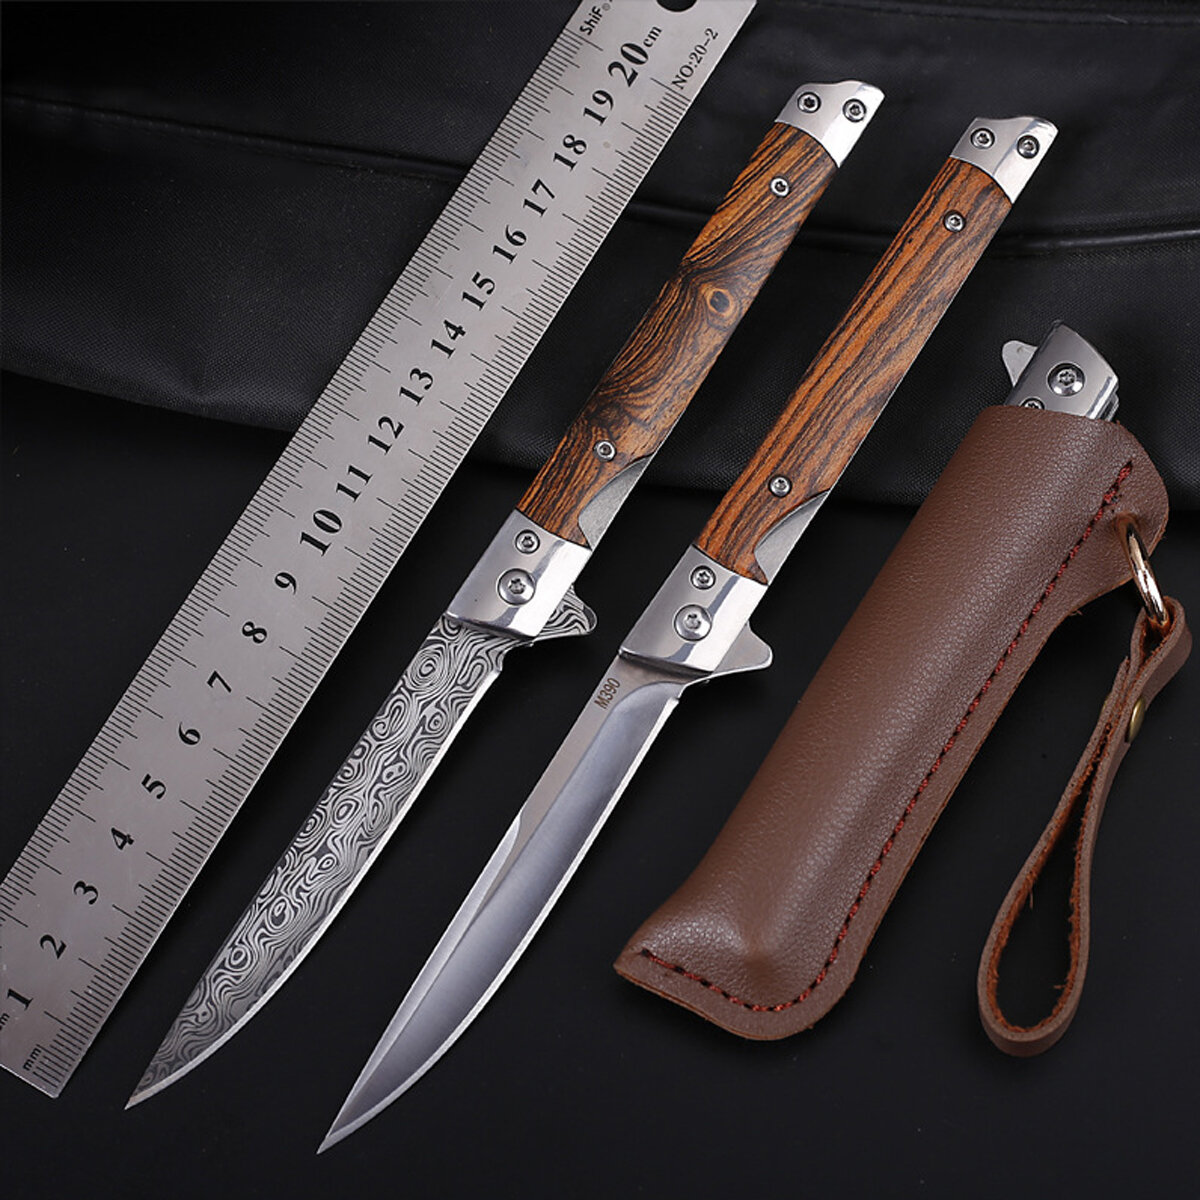 215mm 8.46" Folding Long Knife With Holster 3cr13Mov Blade Wooden Handle Portable Pocket Damascus Knife Outdoor  Camping Hunting Survival Tools